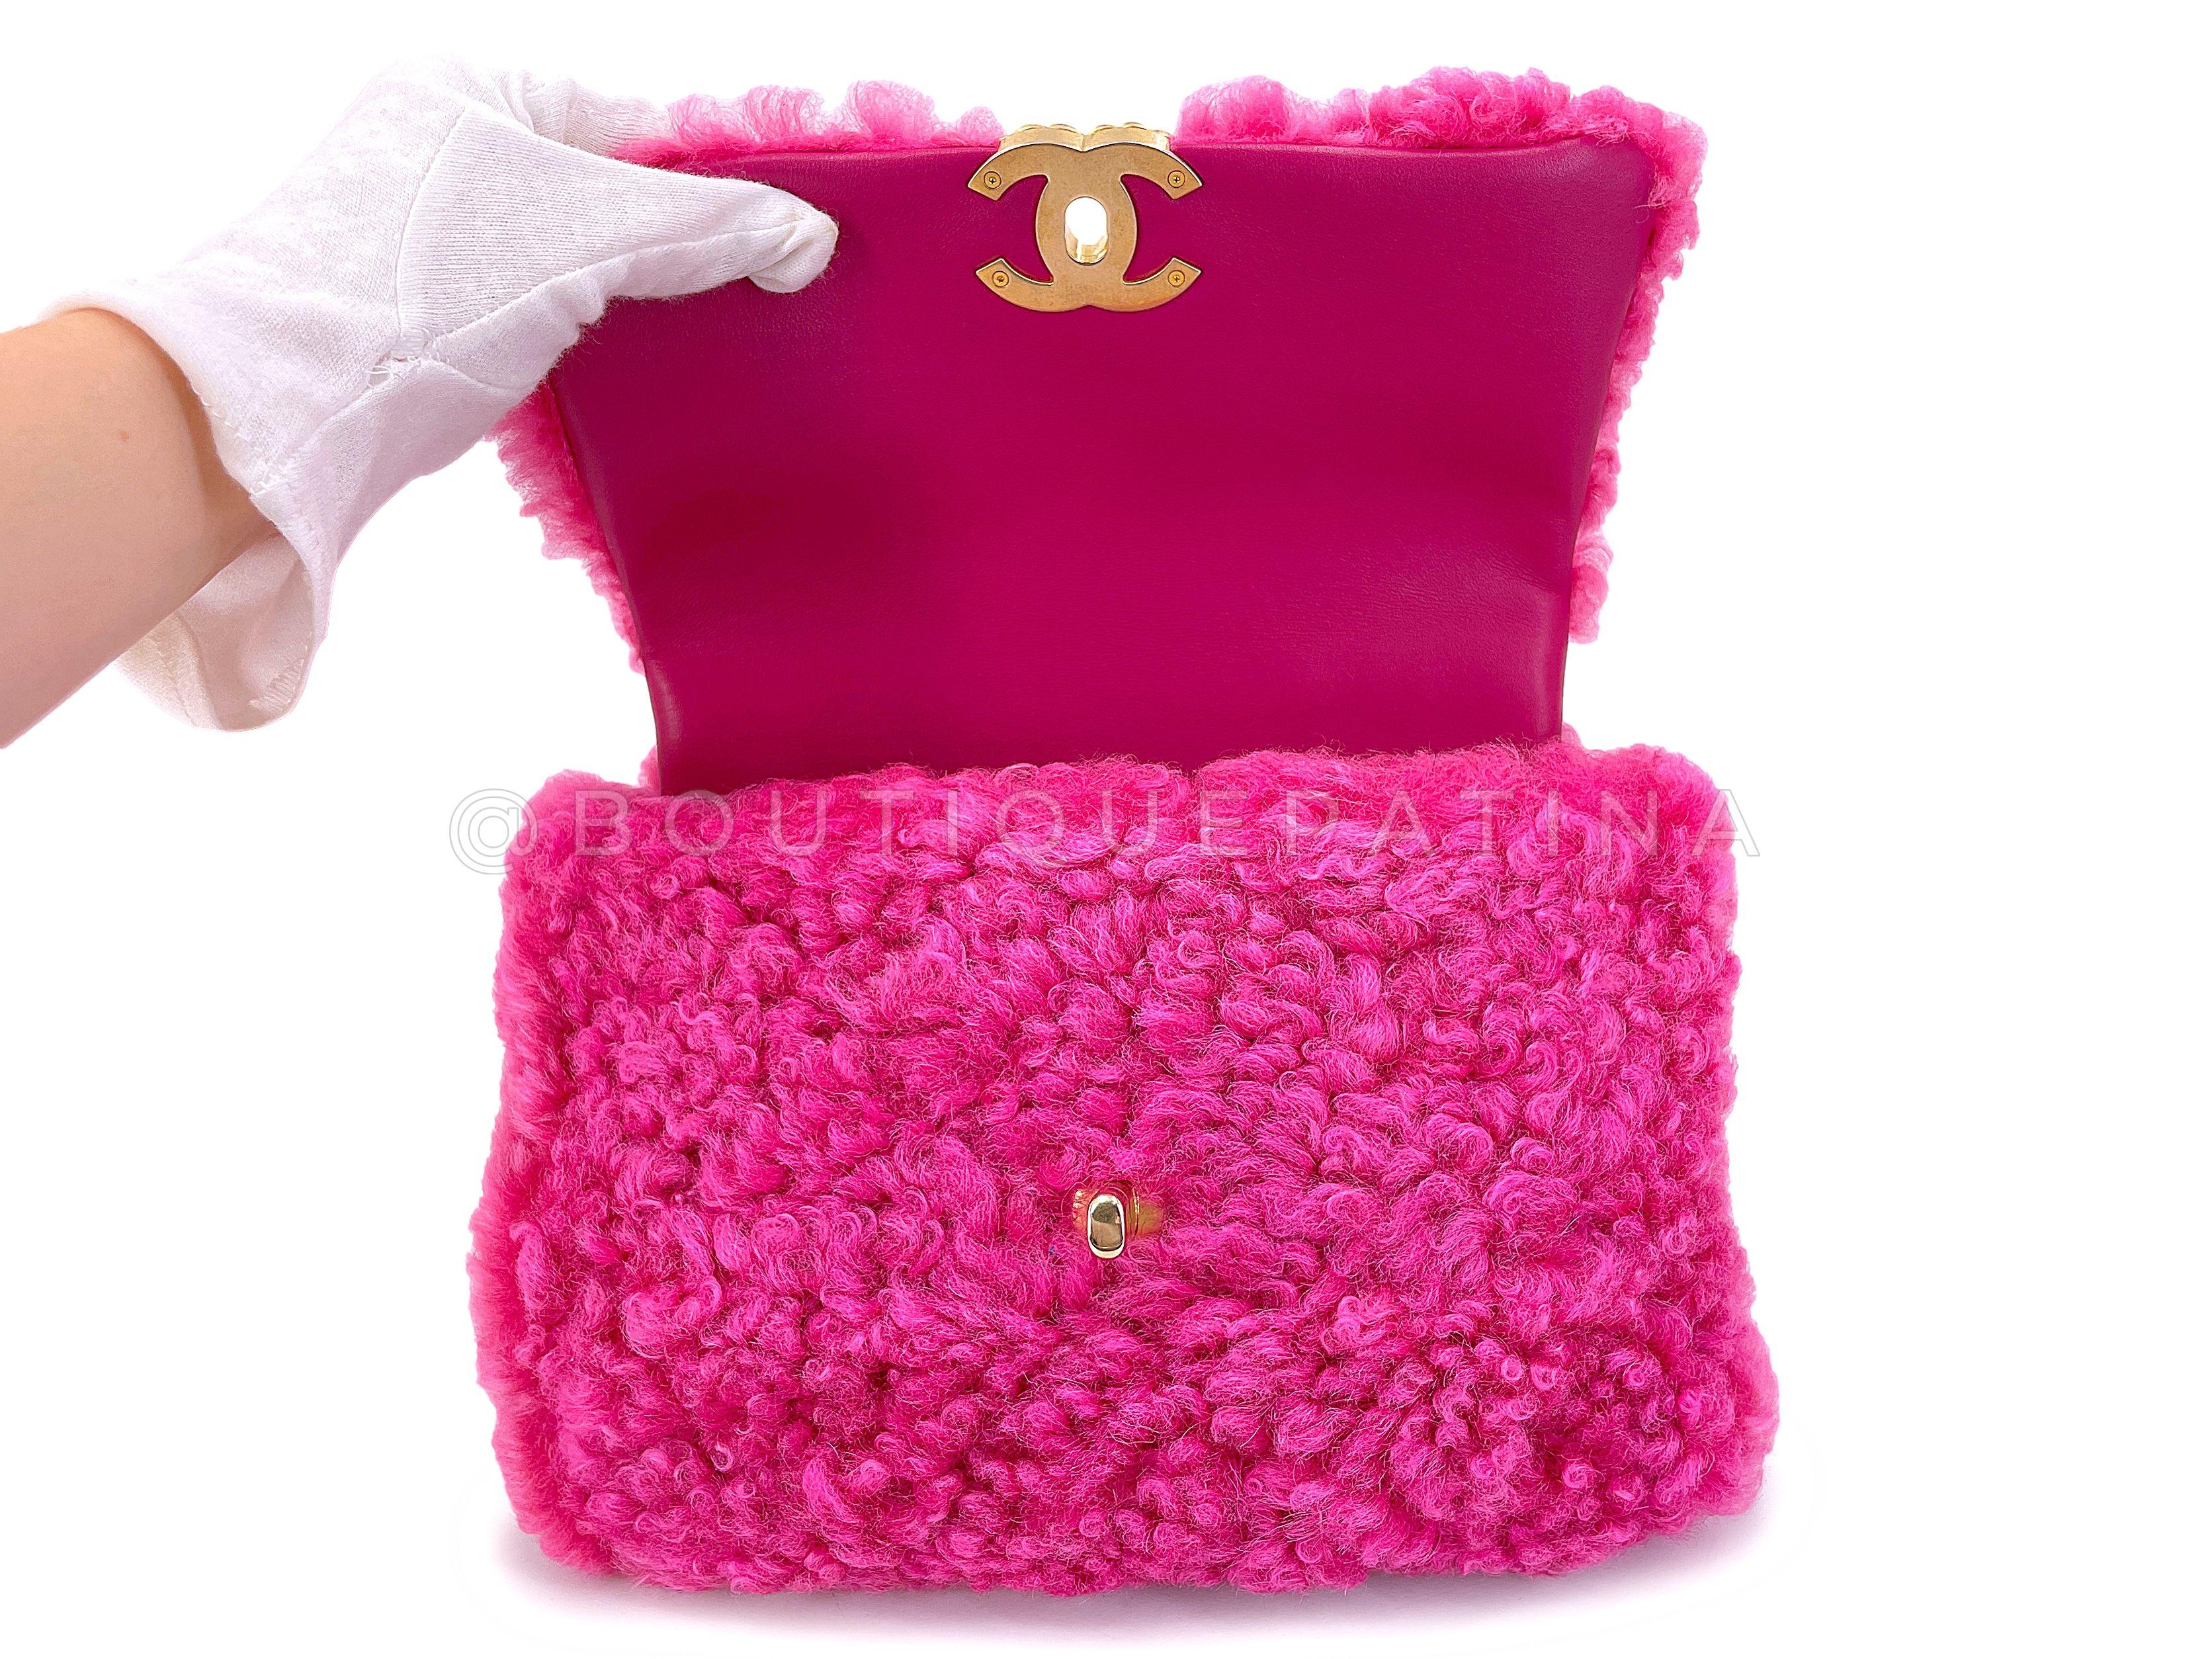 Chanel 19 Pink Shearling Fur Small Medium Flap Bag 67786 For Sale 4